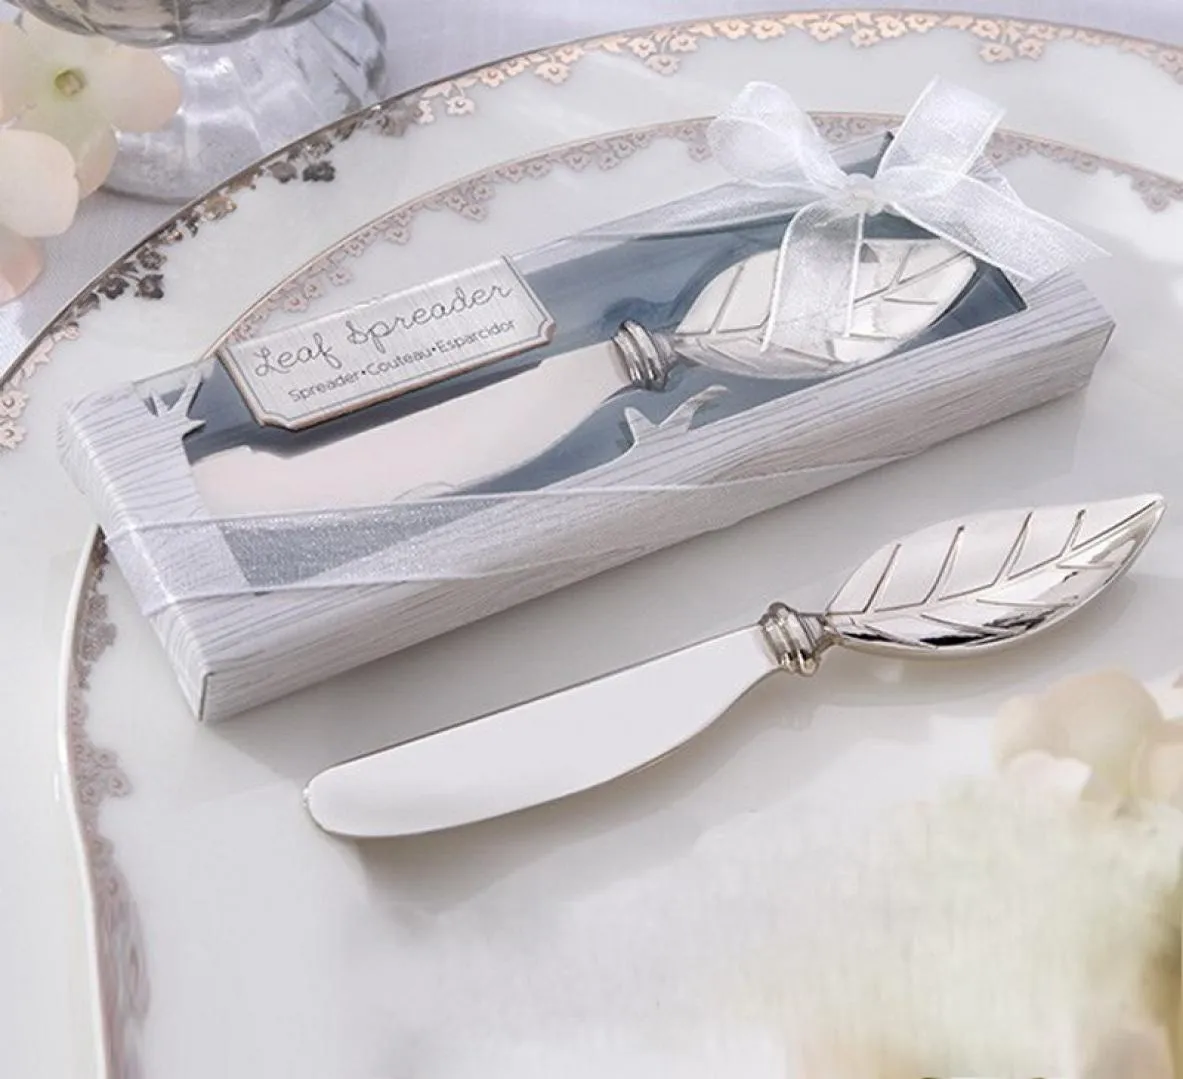 wedding favors gifts party quotspread the lovequot stainless steel maple leaf butter knife spreader souvenirs box packing4509501